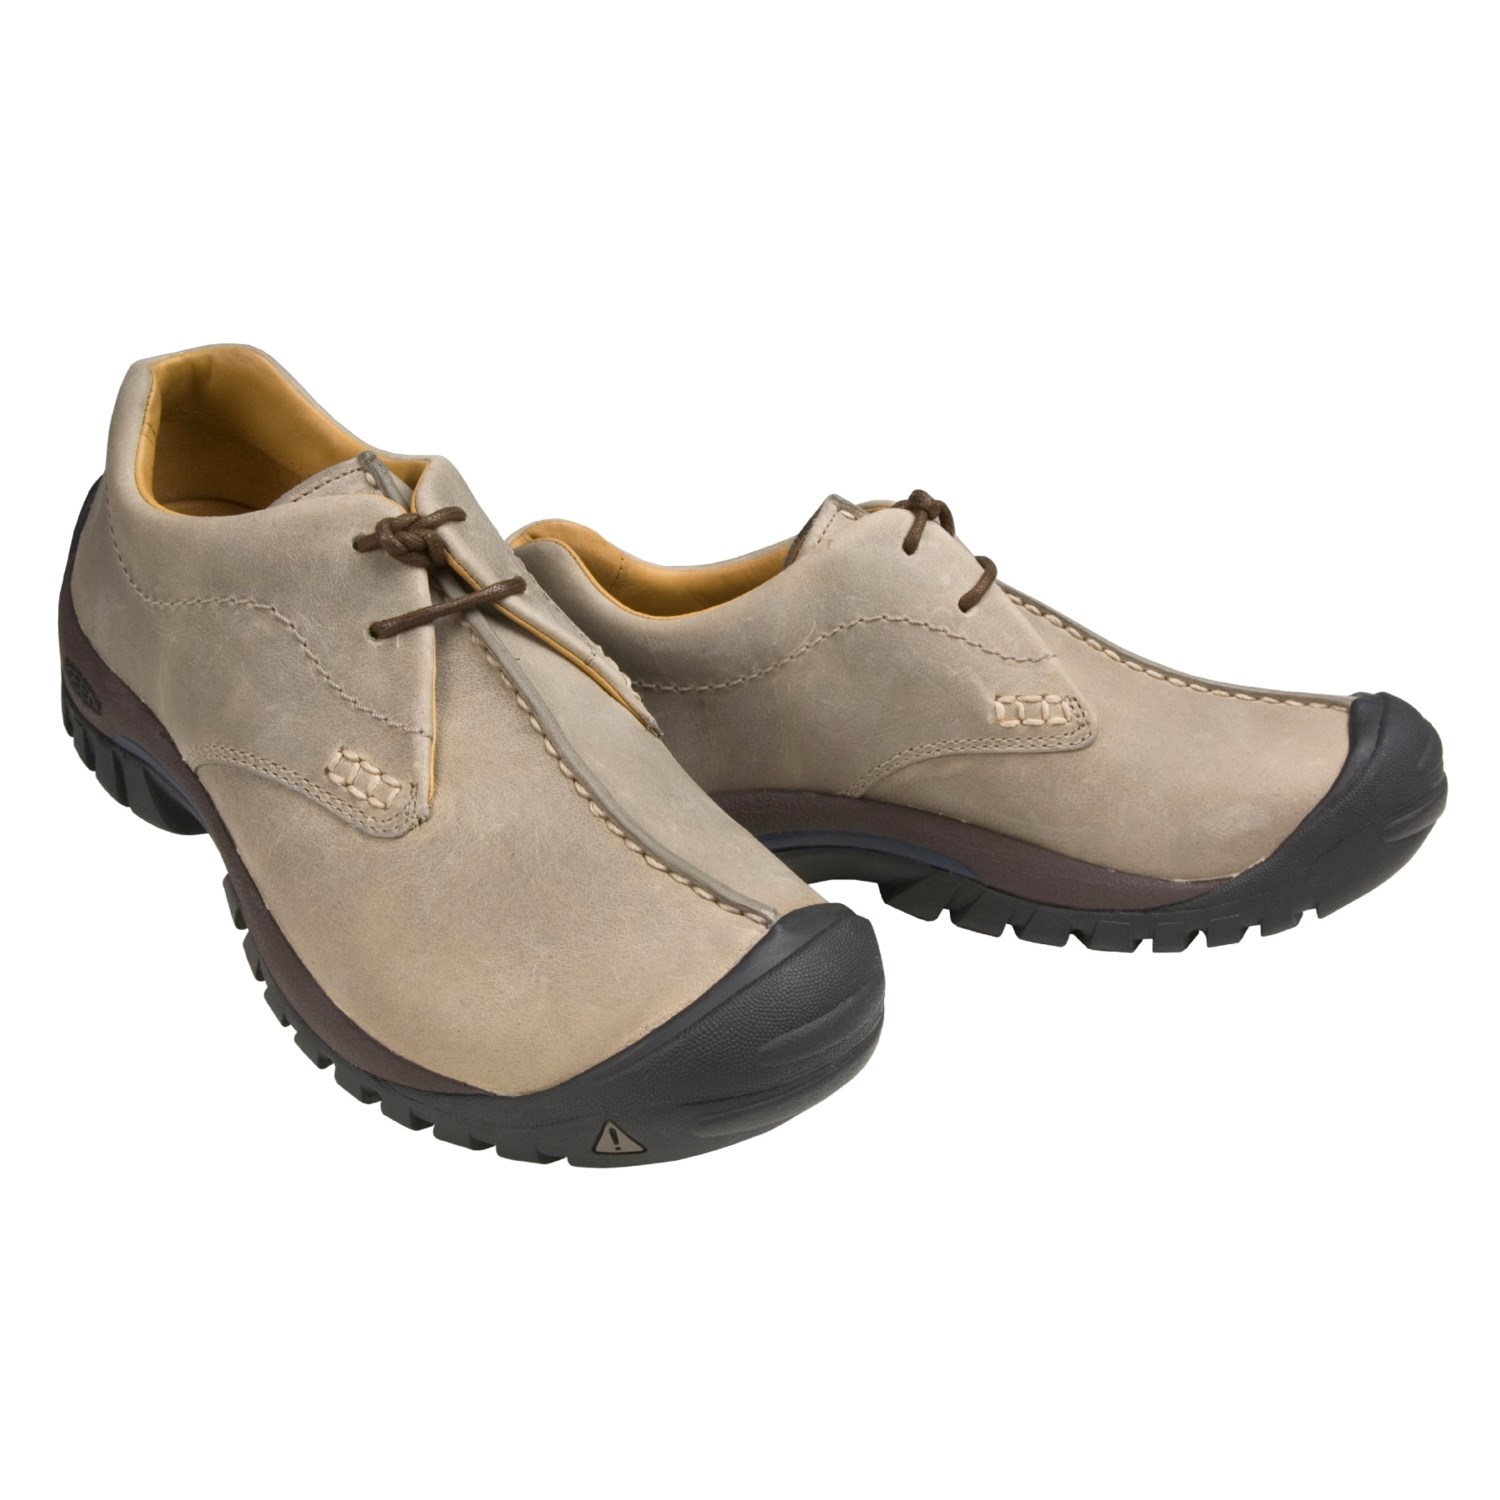 Keen Footwear Boston Leather Shoes (For Women) 77010 - Save 37%